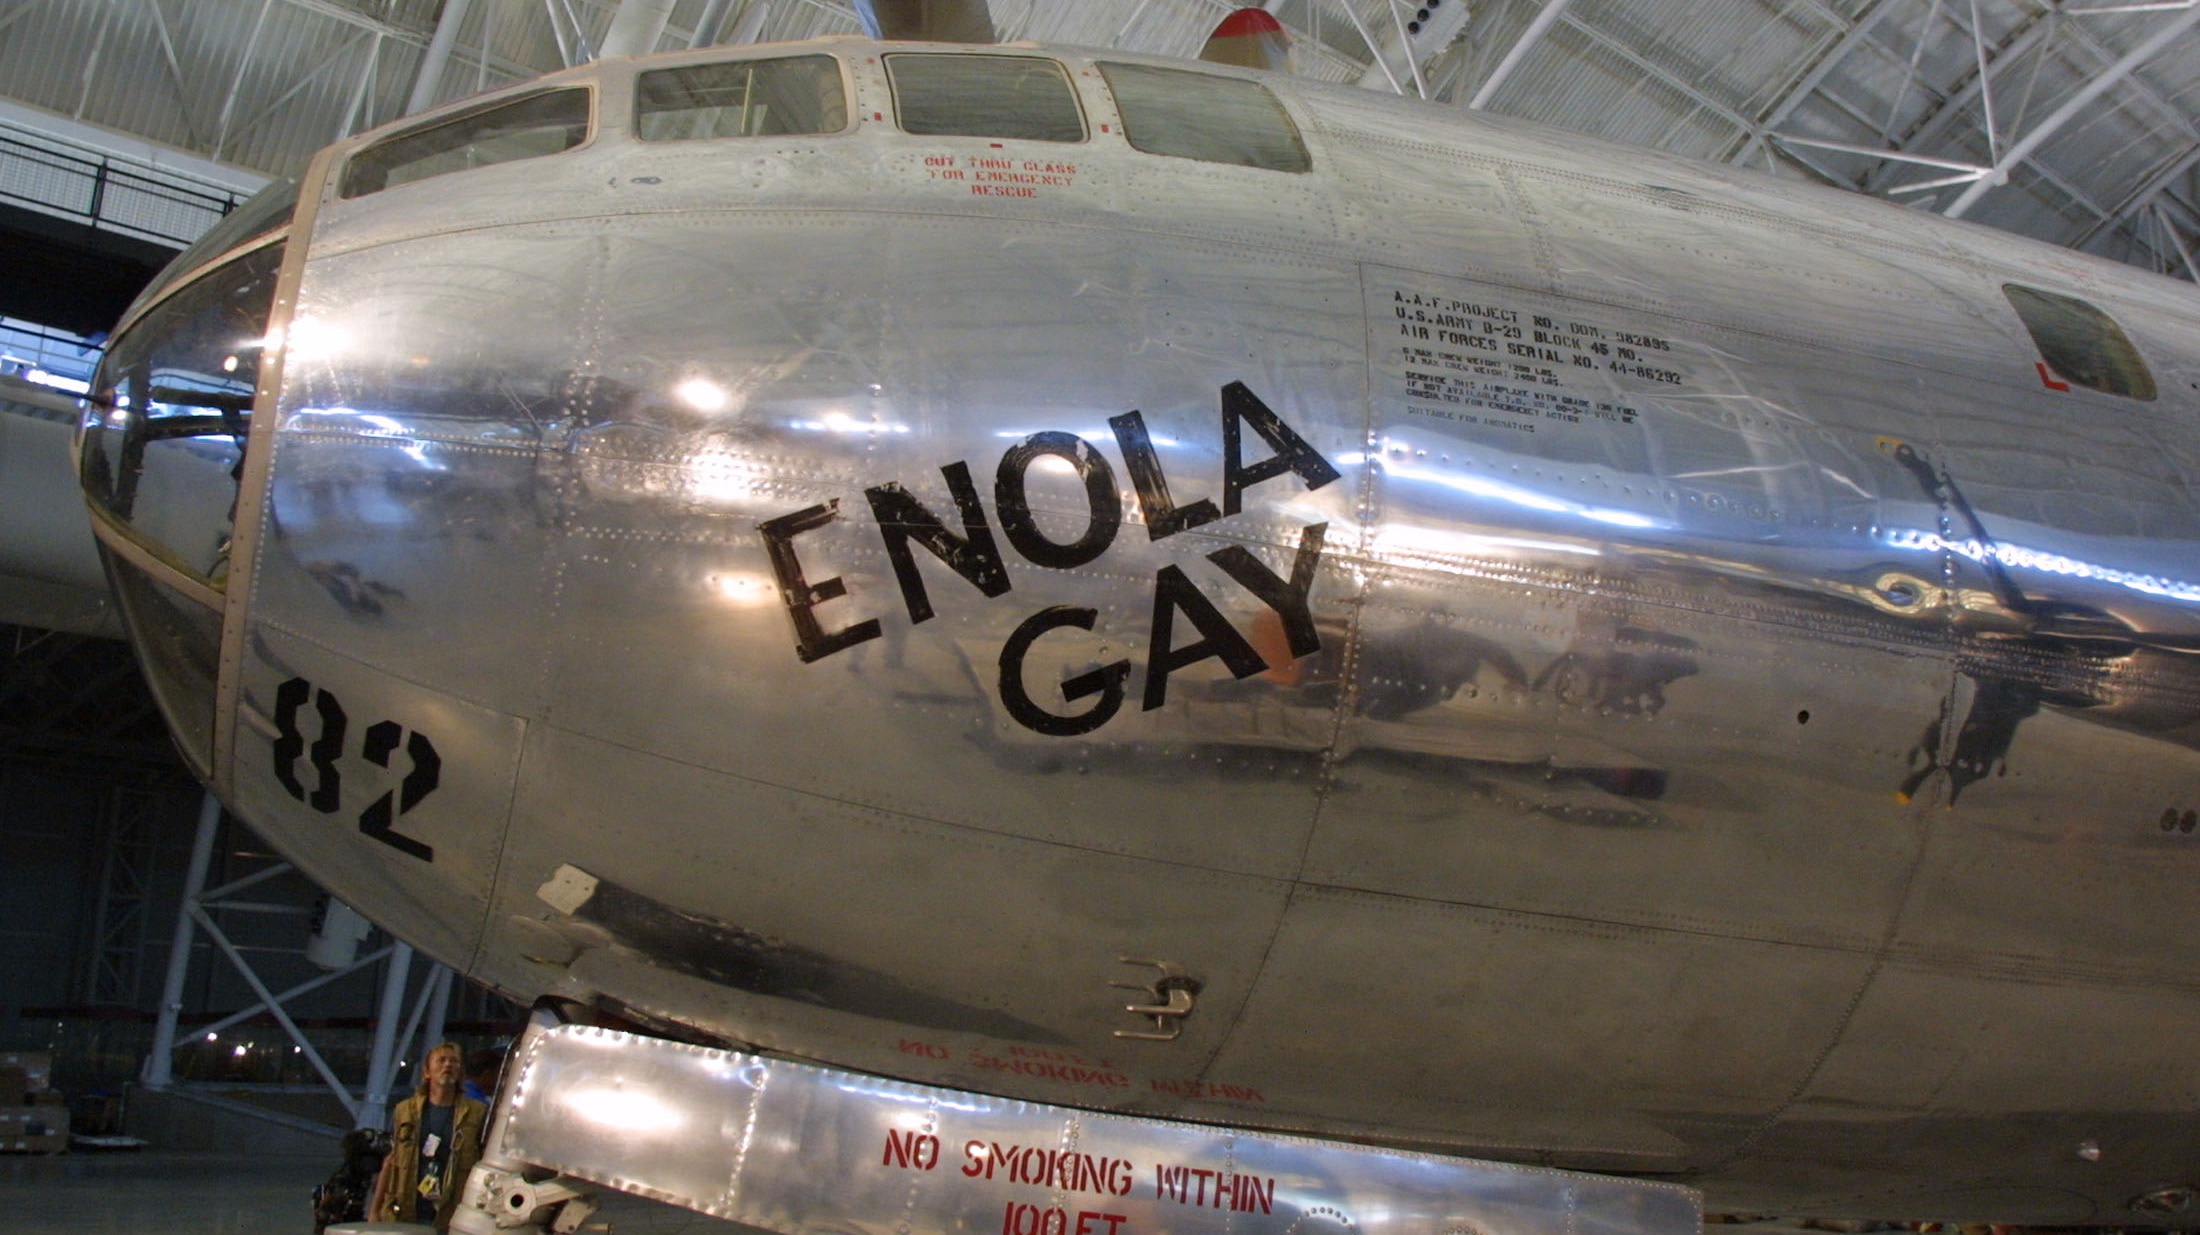 where did enola gay name come from